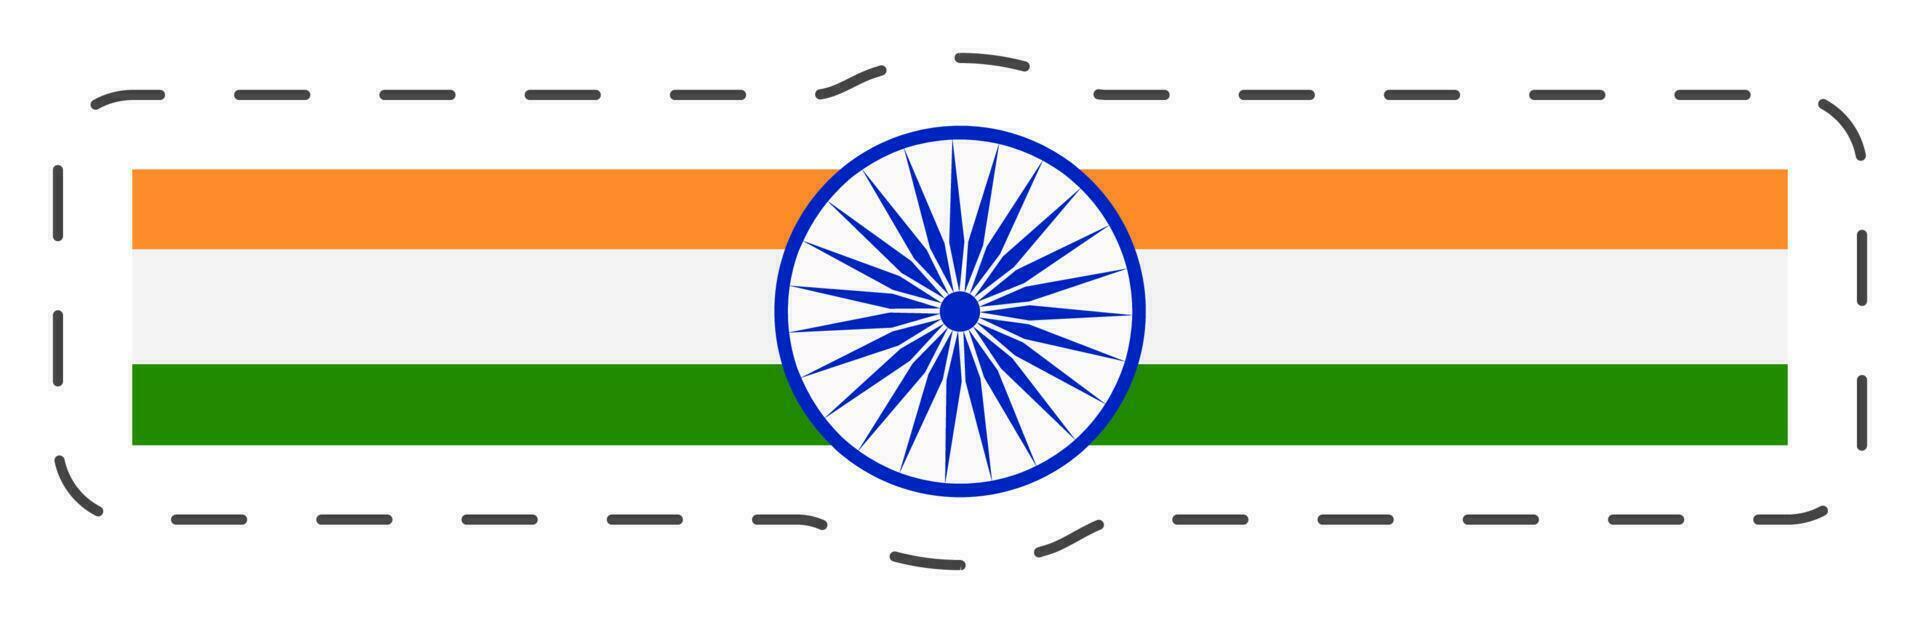 Tricolor Ribbon With Ashoka Wheel In Sticker Style. vector